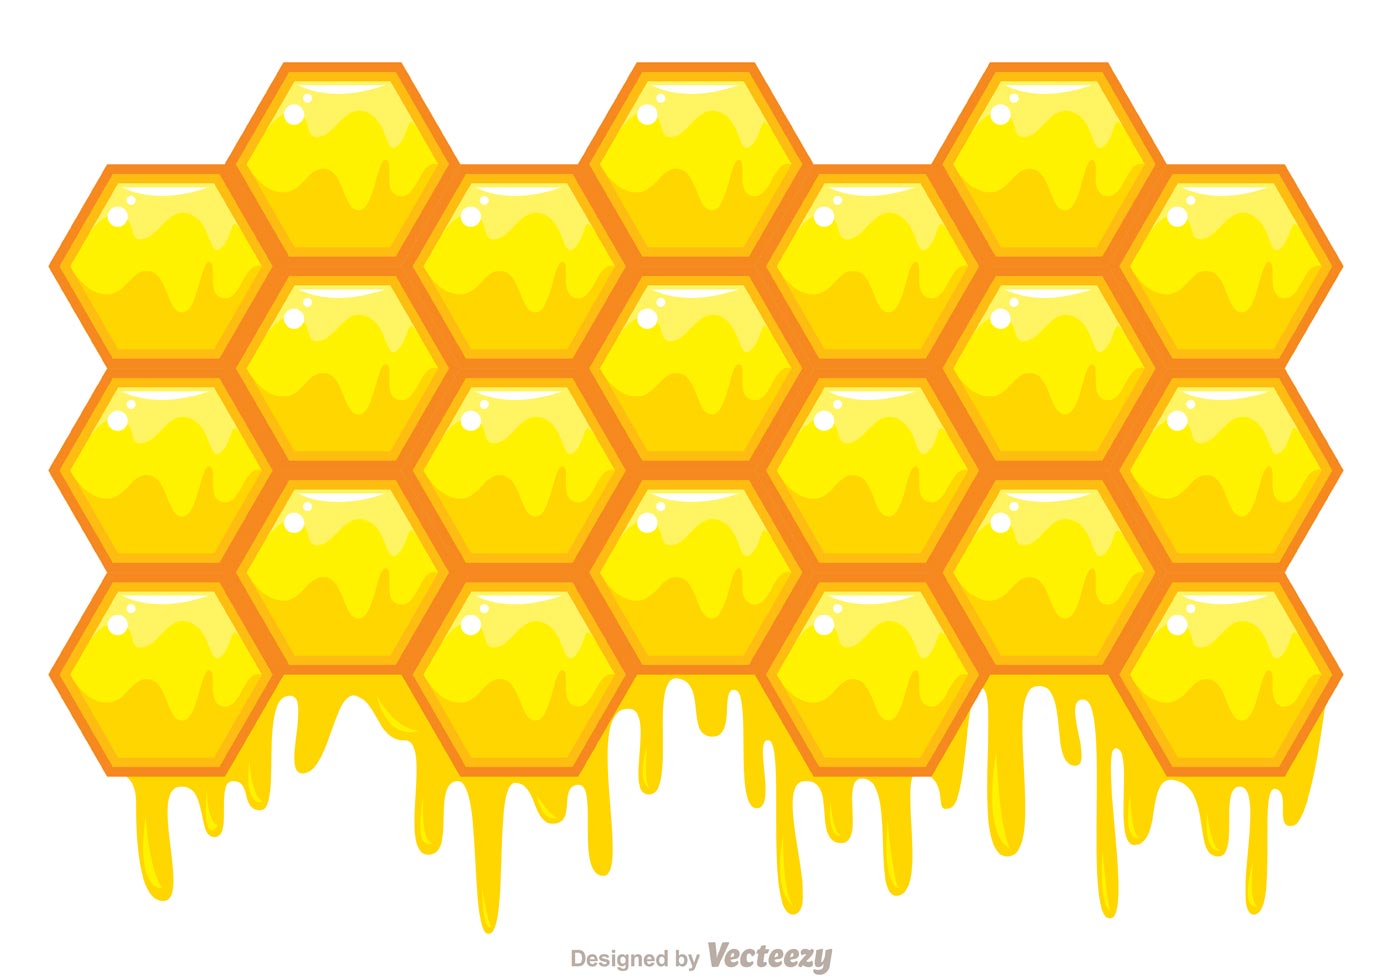 Download the Honeycomb Vector Background 82906